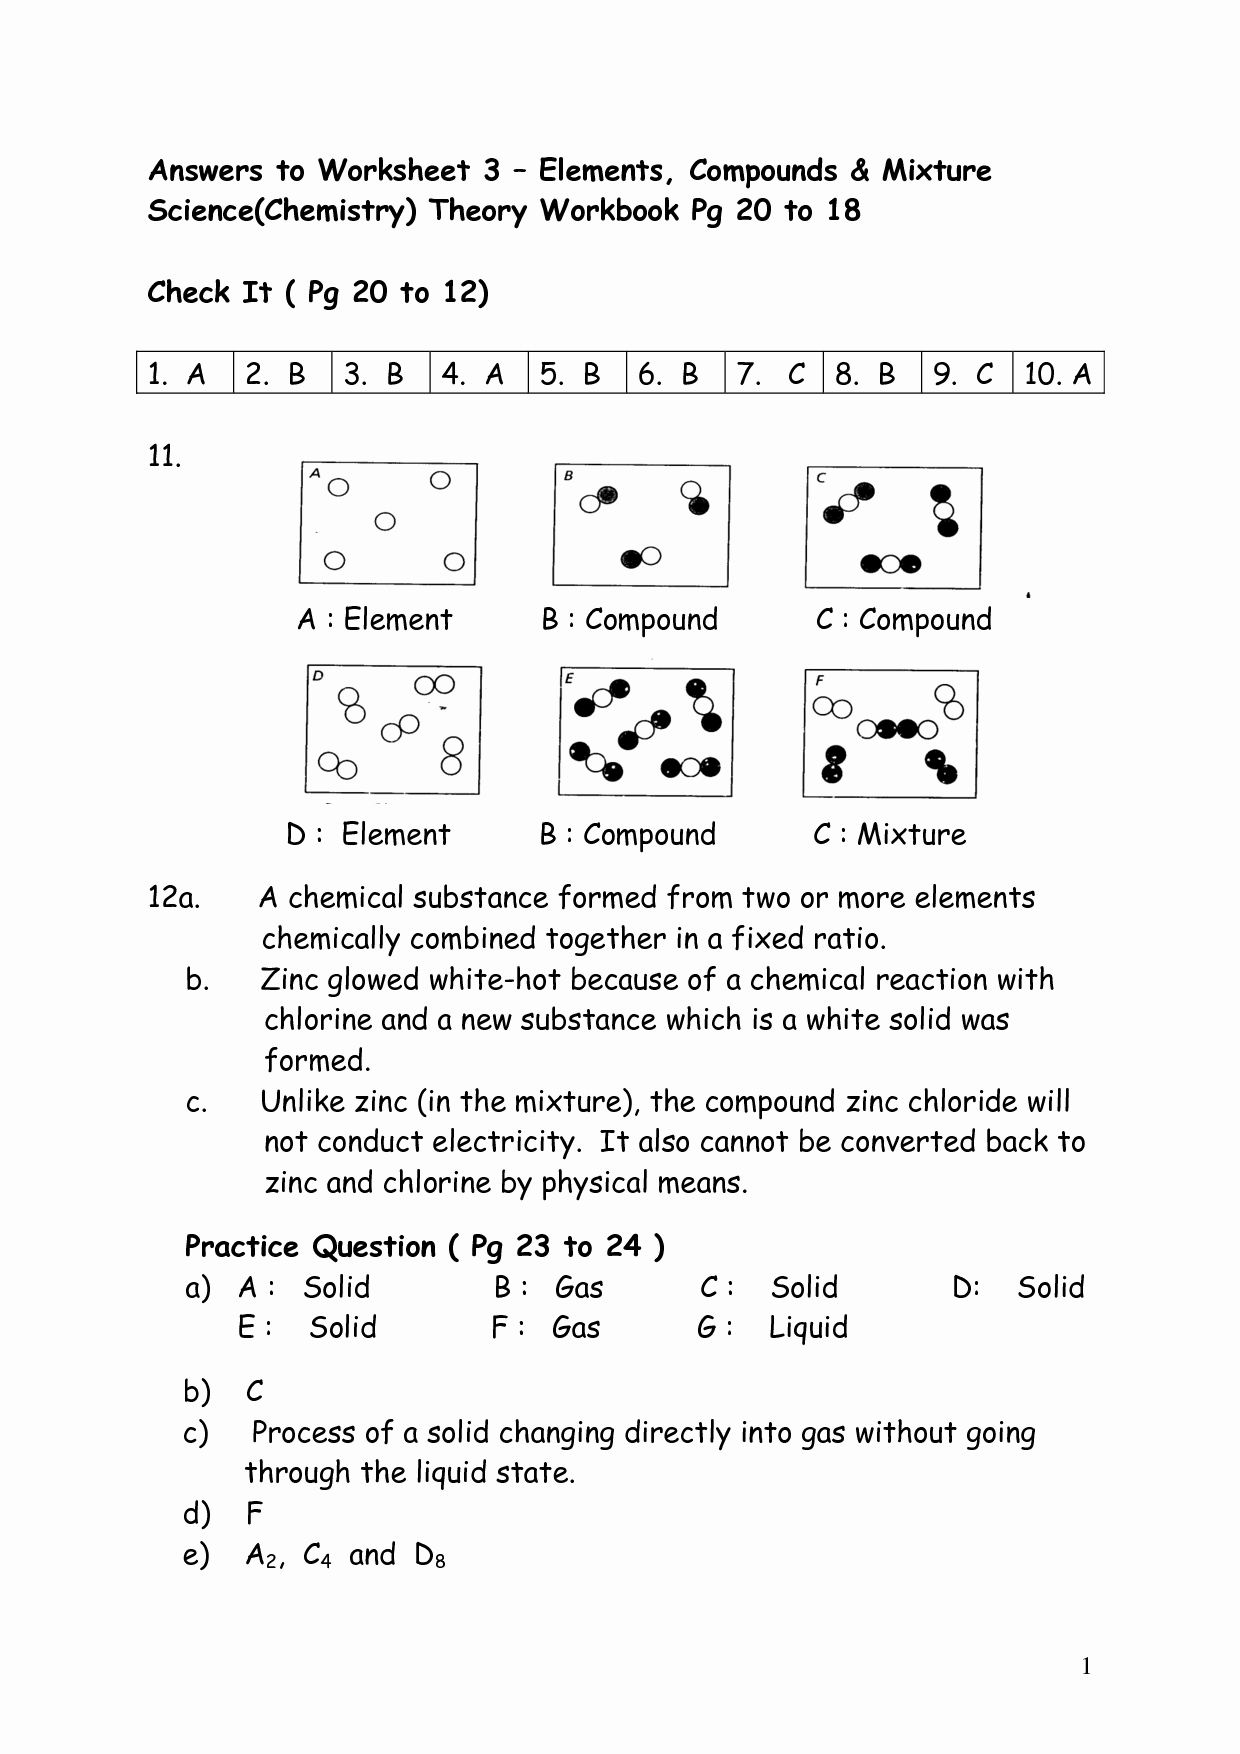 Elements Compounds Mixtures Worksheet Answers Lovely Elements Pounds Mixtures Worksheet Answers